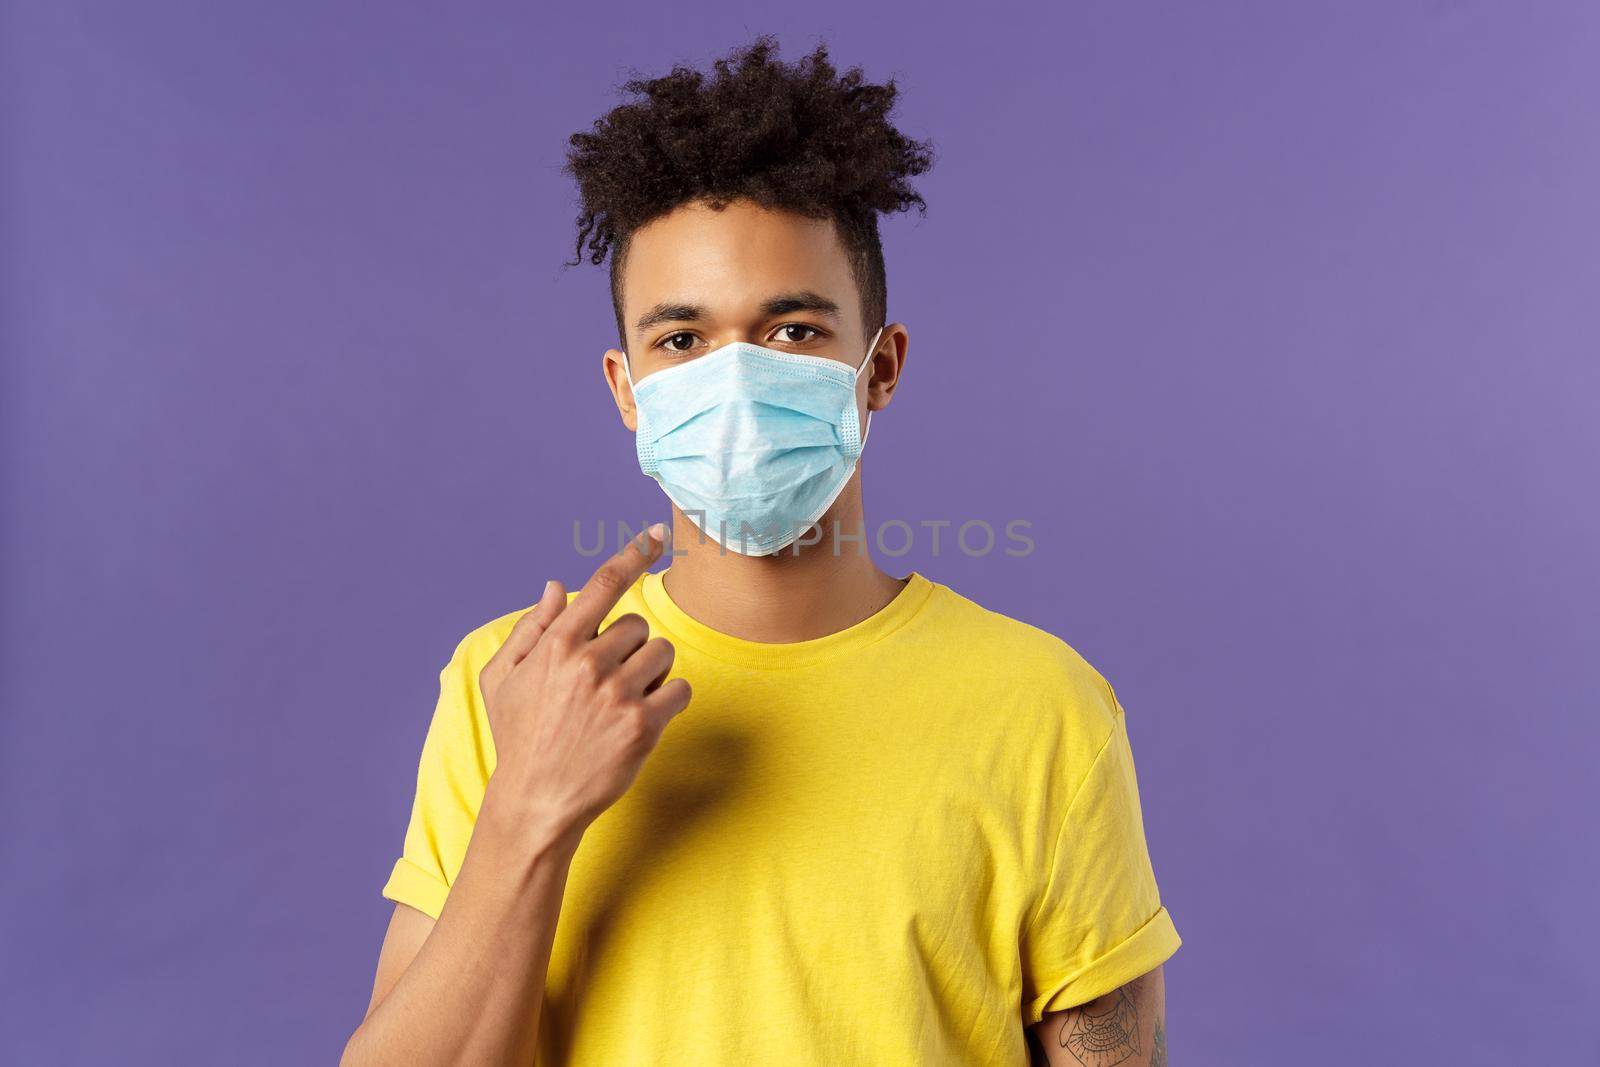 Covid19, healthcare and medicine concept. Young hispanic guy with afro haircut, wear and point at face mask, social-distancing during pandemic, explain friends how to prevent catching disease.